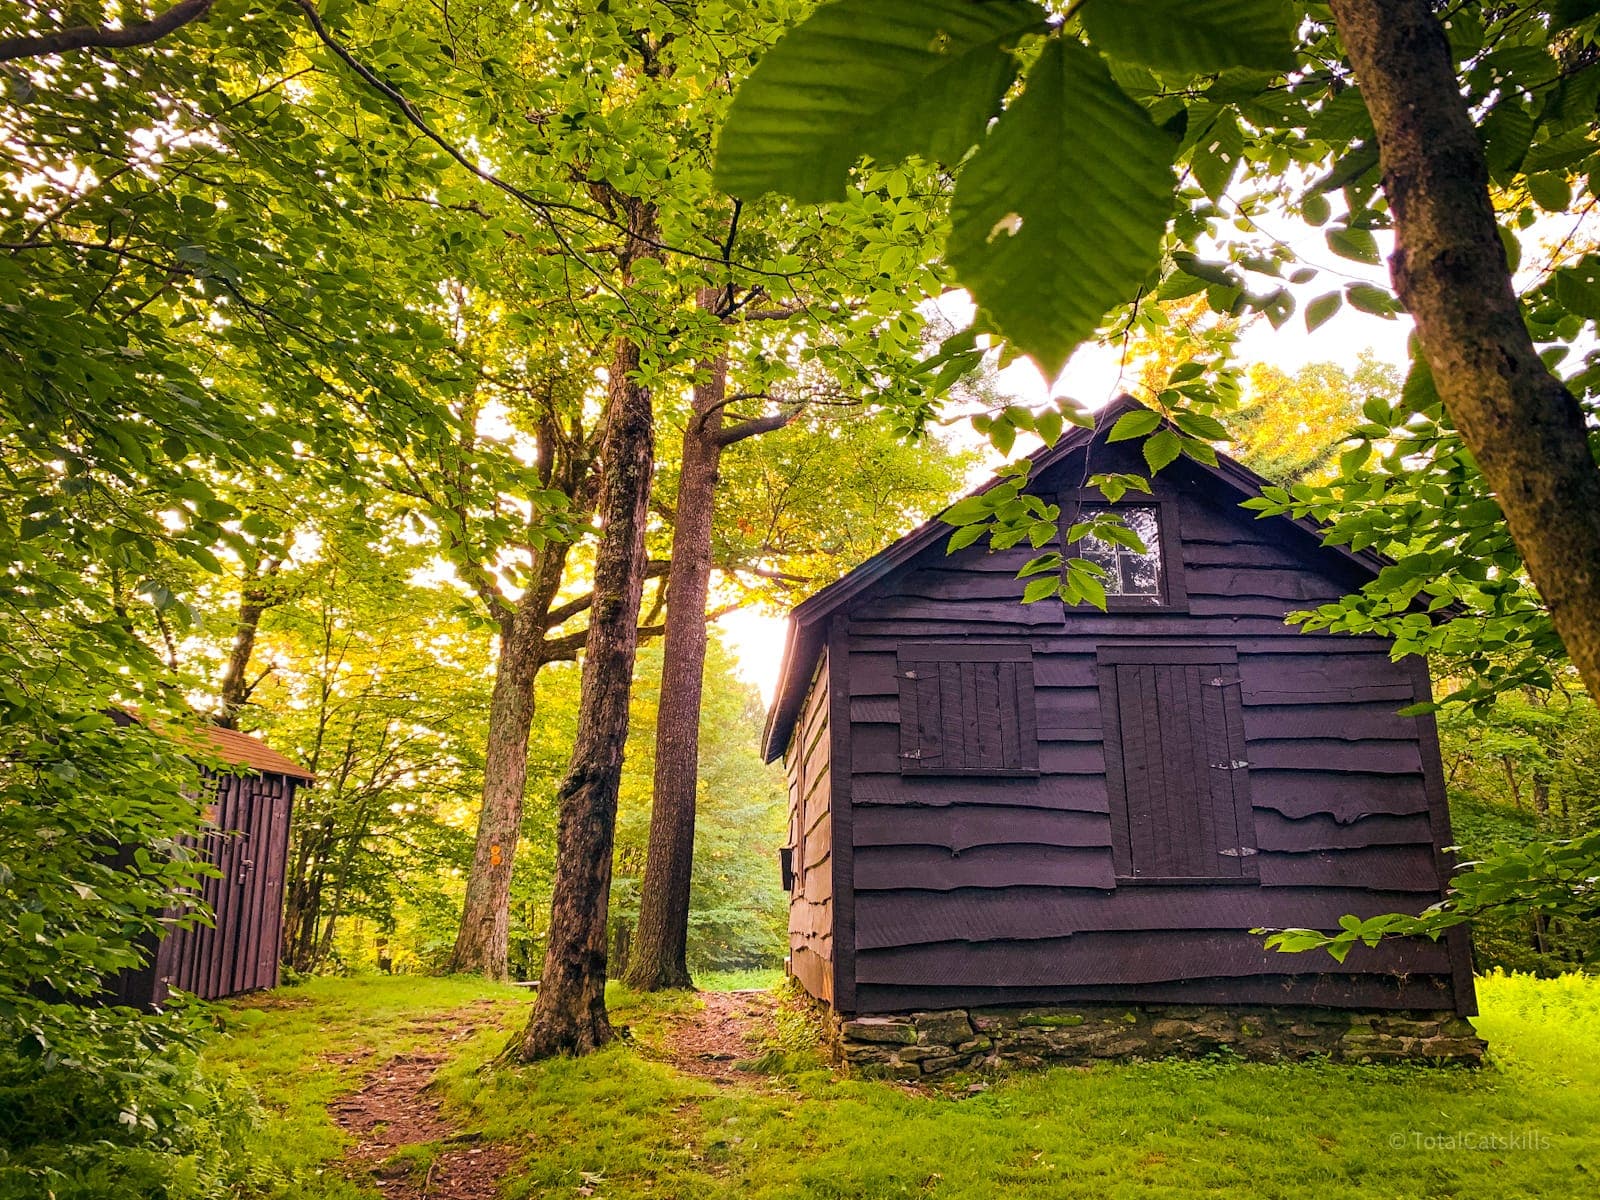 cabin in woods and small wooden outhouse